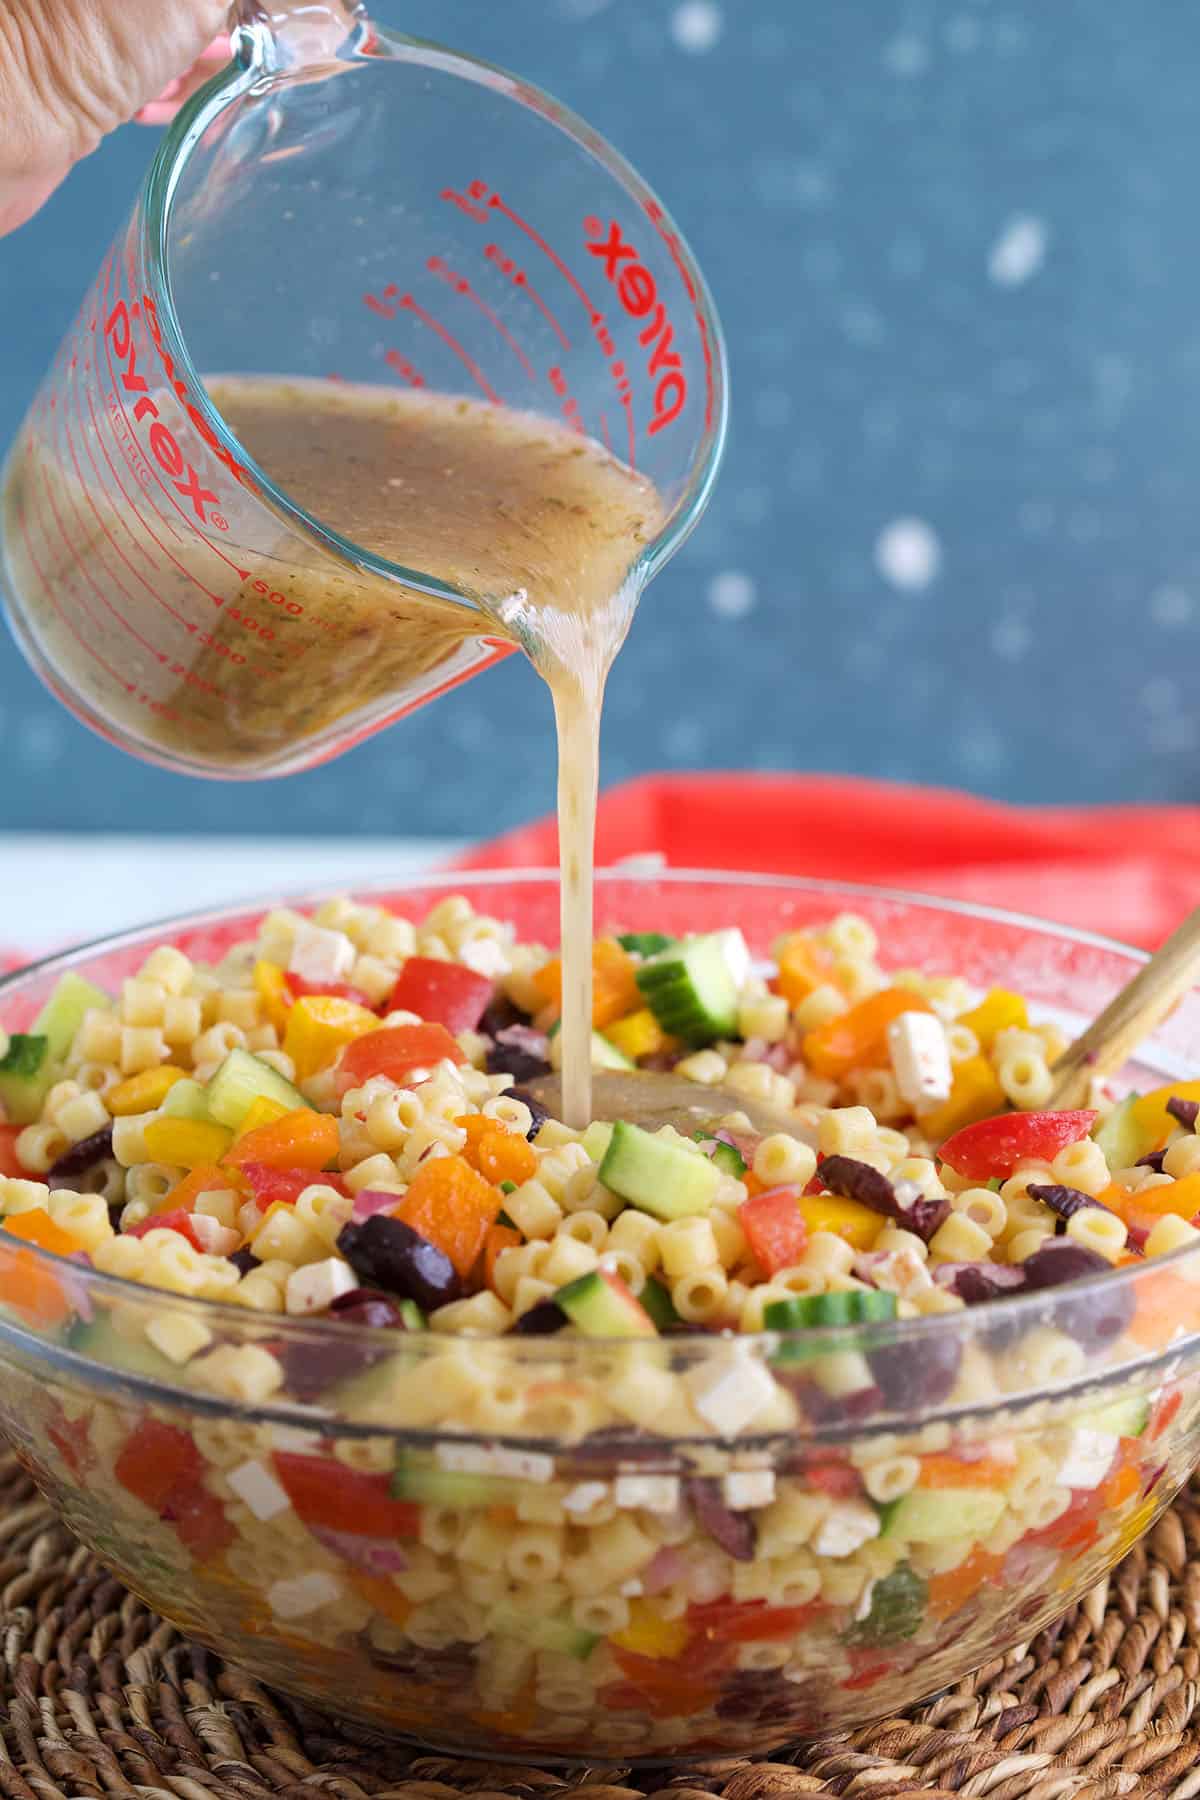 Greek Salad Dressing being poured over pasta salad in a glass bowl.